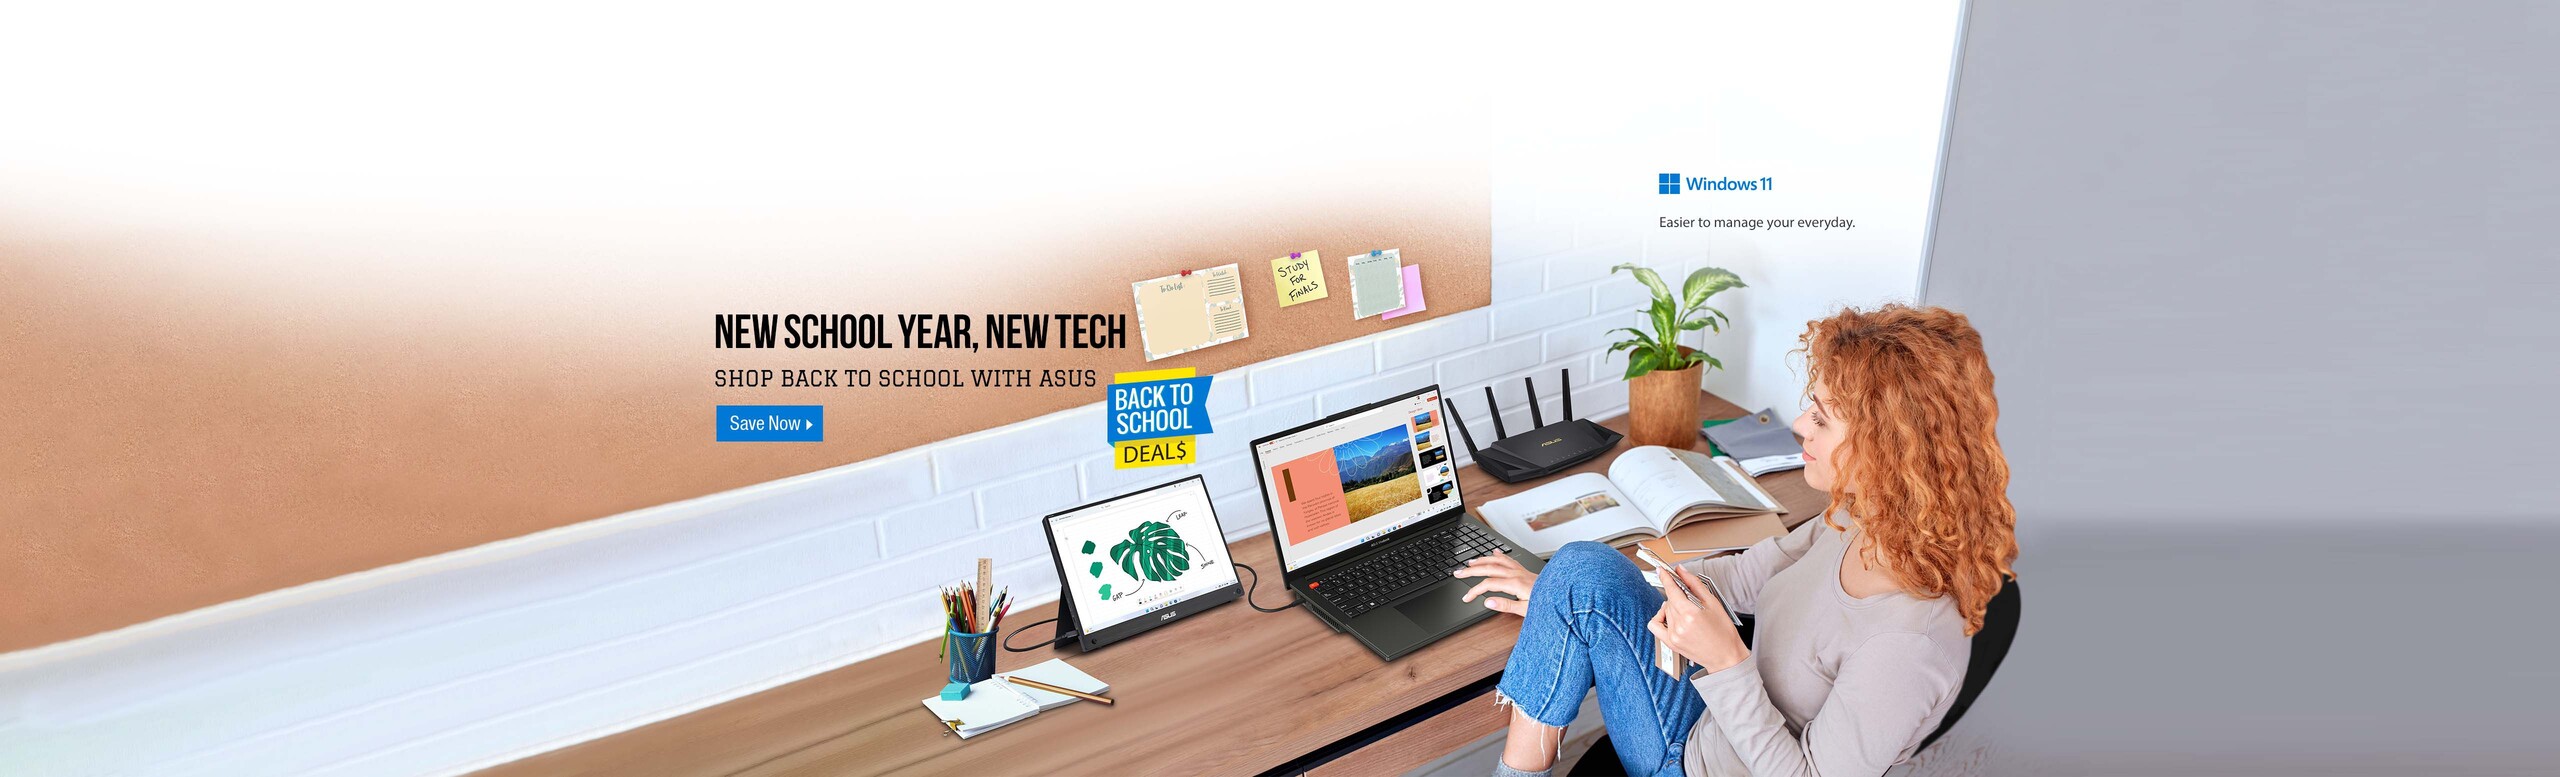 Image of a woman at her desk with a laptop, tablet and wifi  New School Year, New Tech Shop Back to School With Asus Back to School Deals.  Window 11 logo